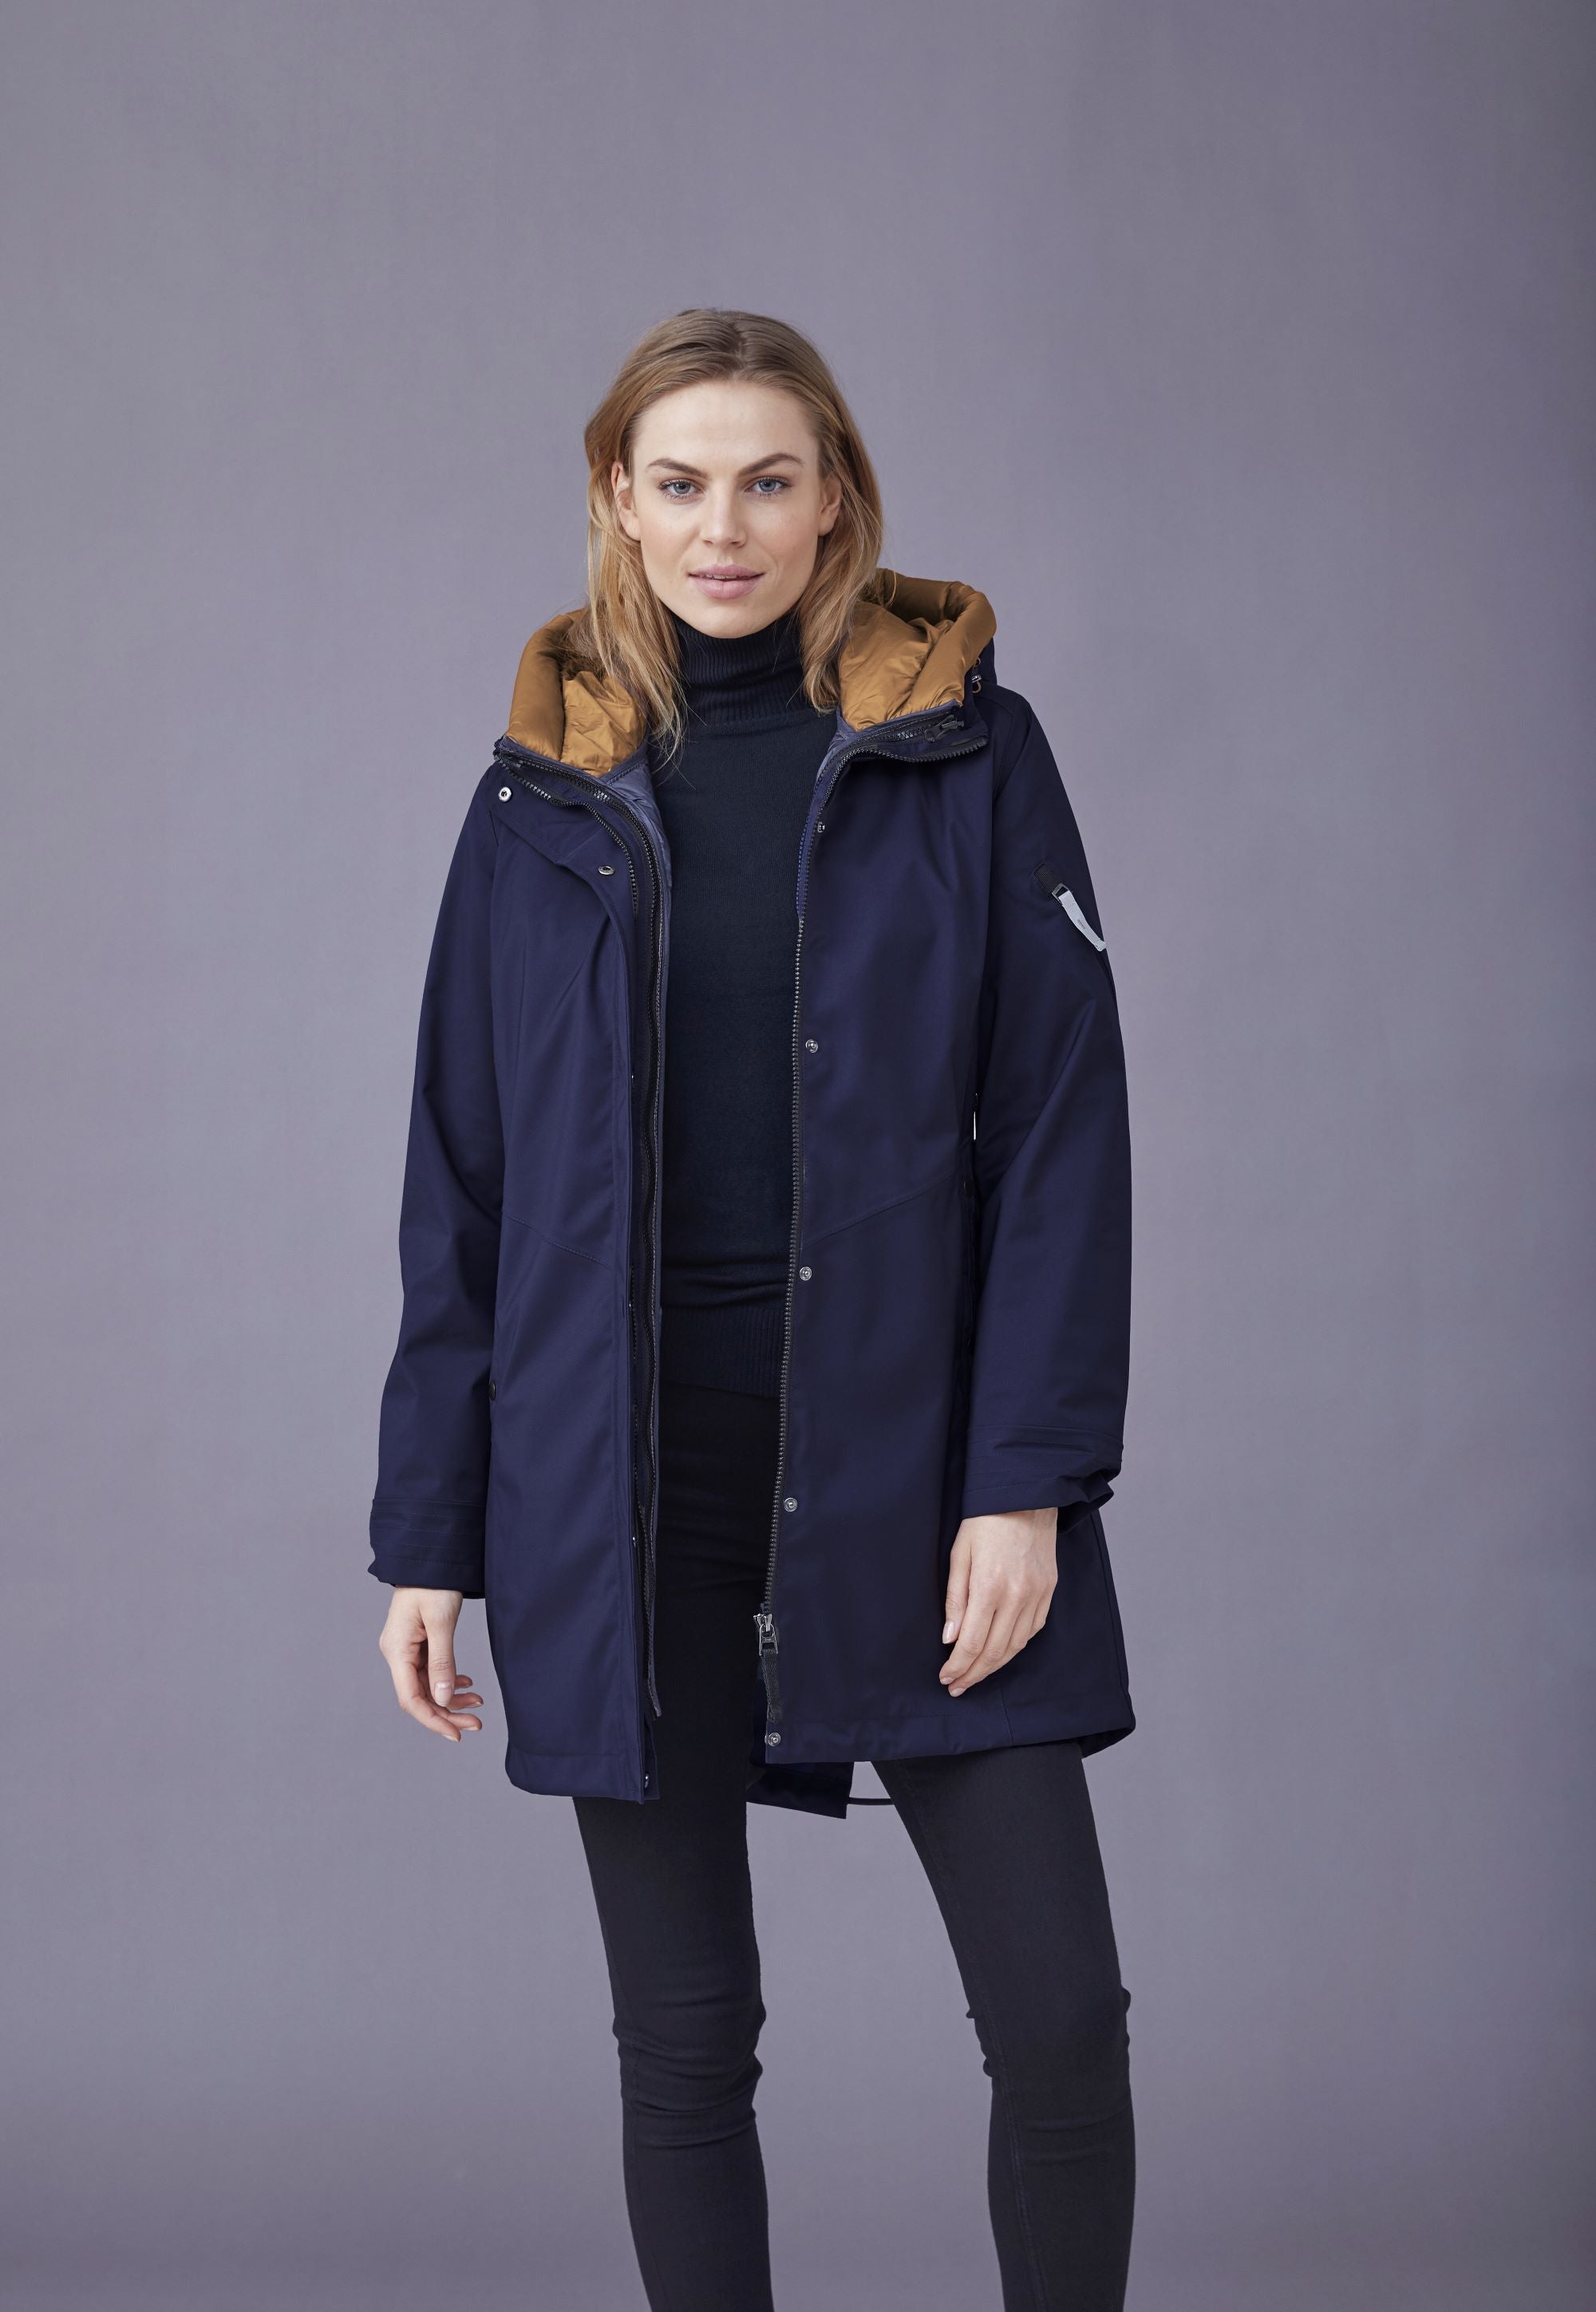 Winter Jackets | For Every Occasion | Timeless Choices – Page 2